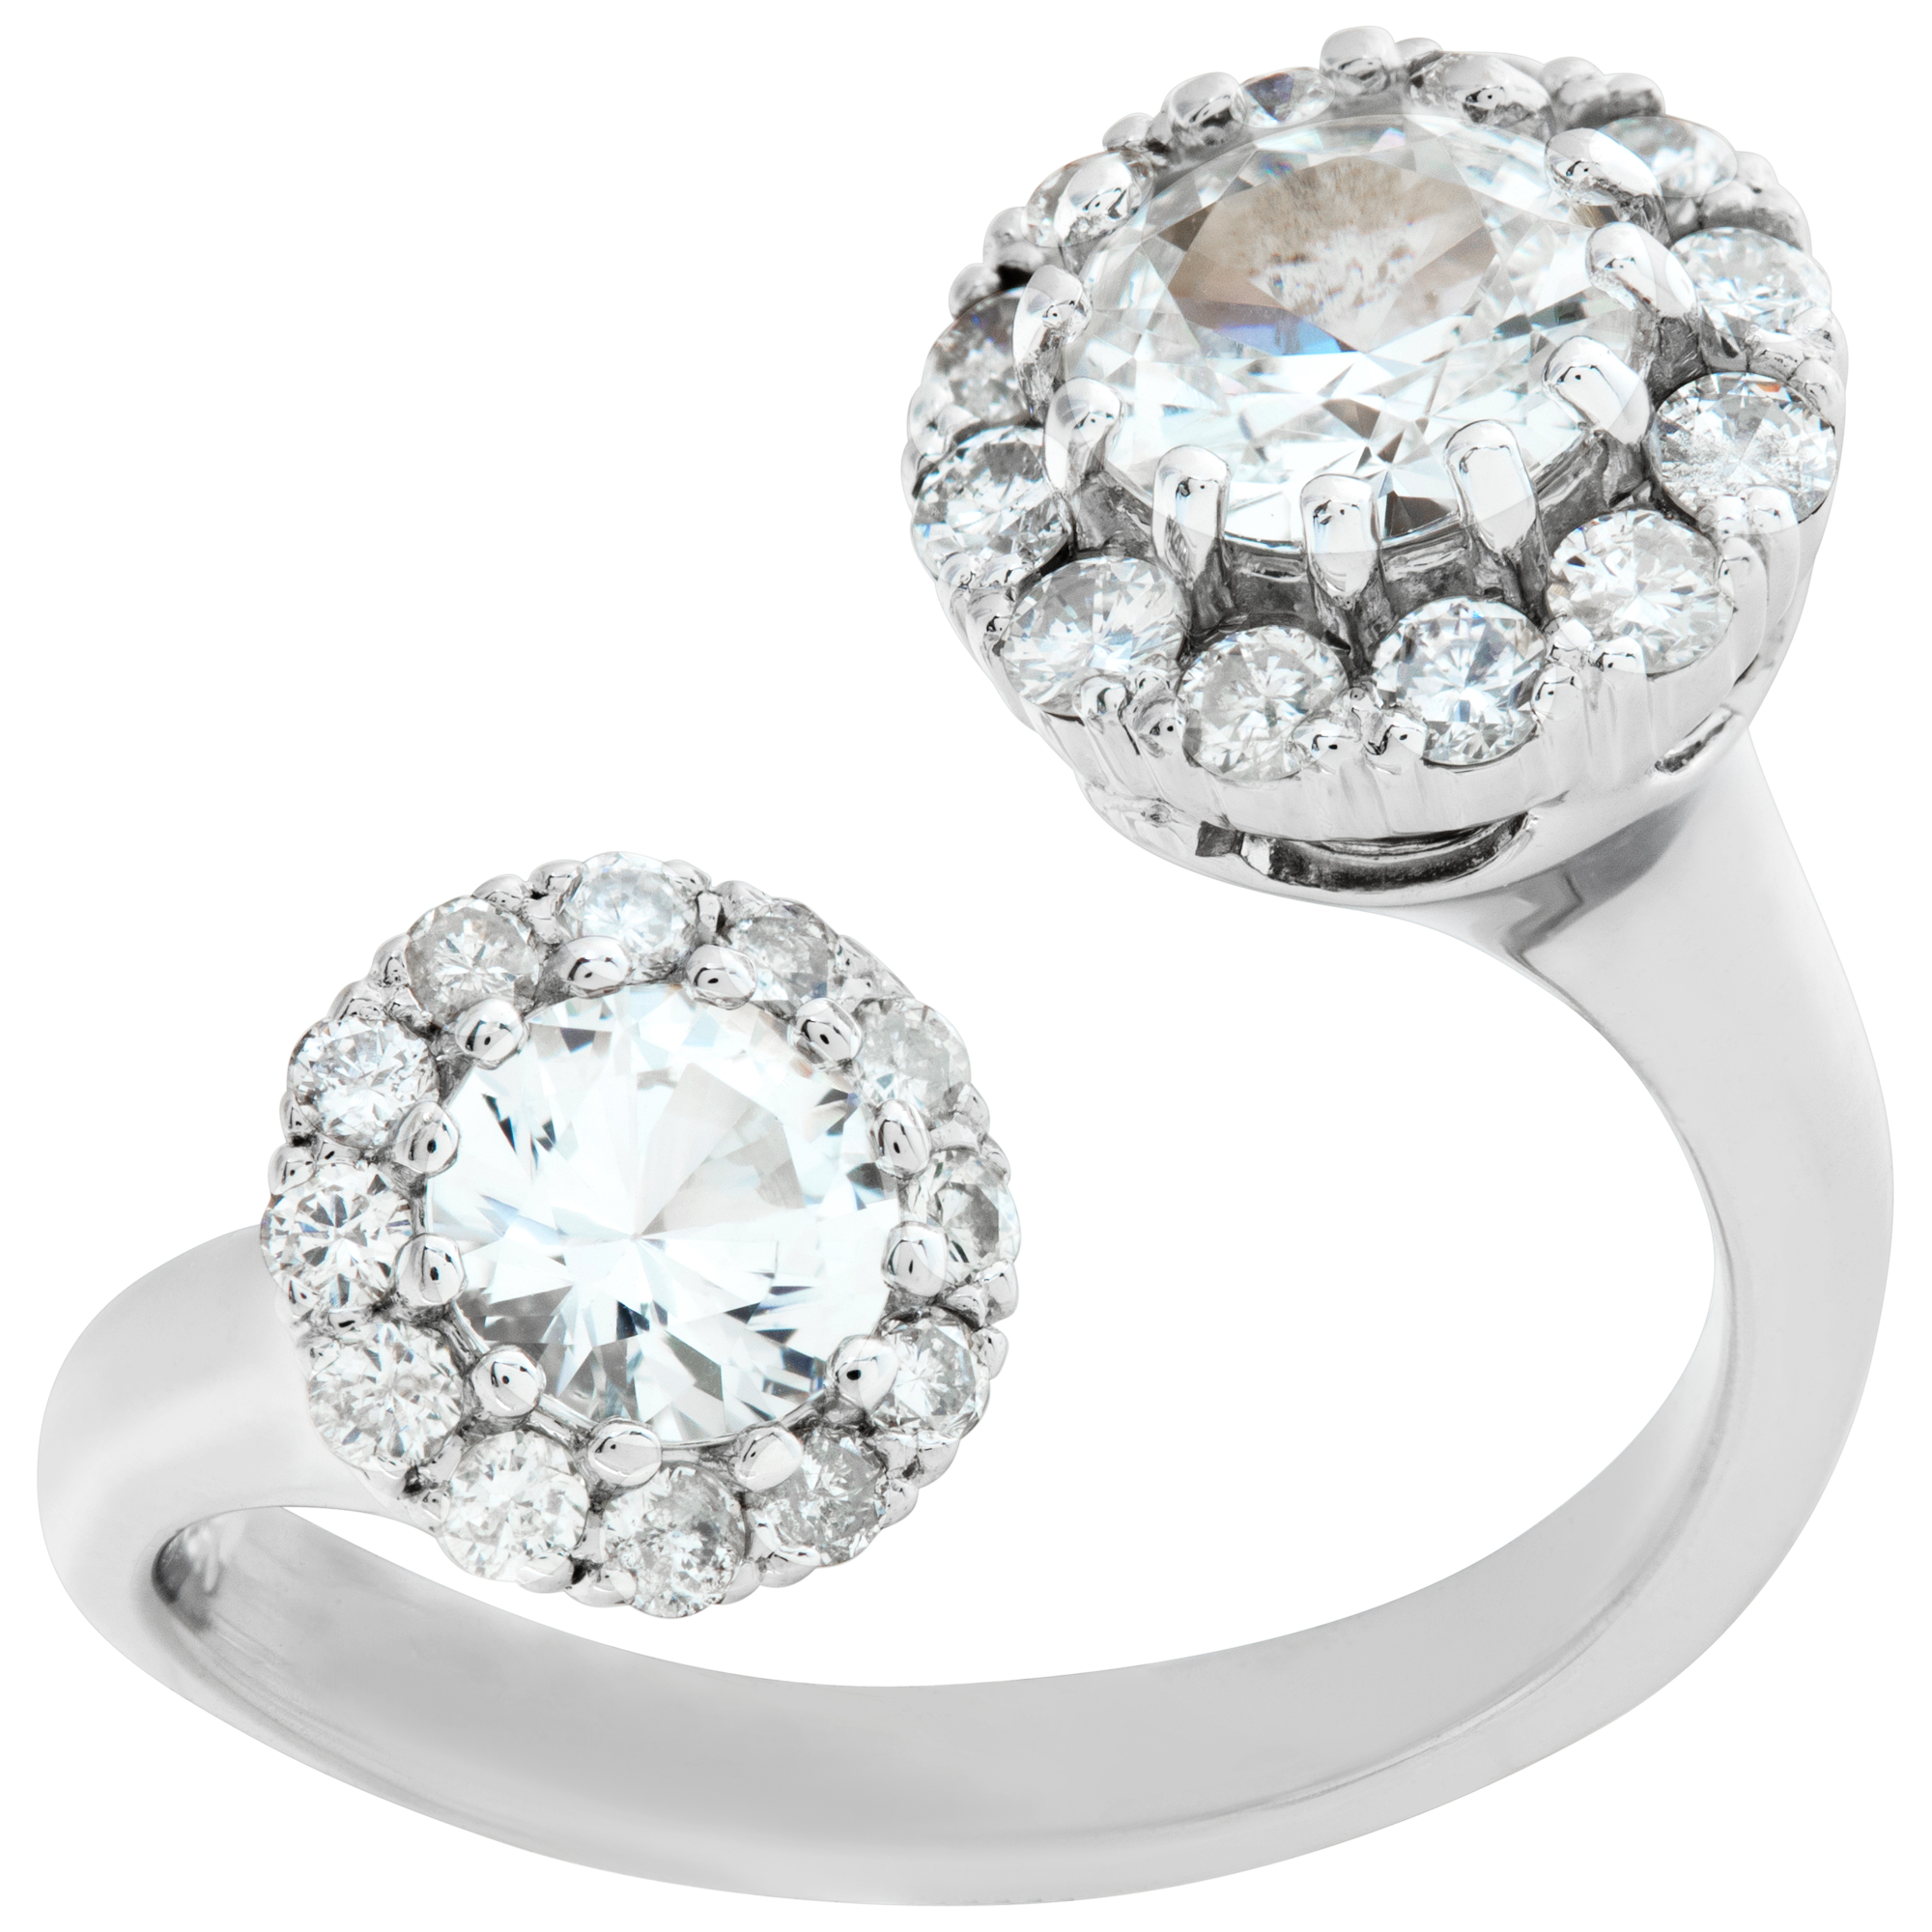 White Sapphires with Halo Diamonds set in 18k white gold. Size 5.25 image 1